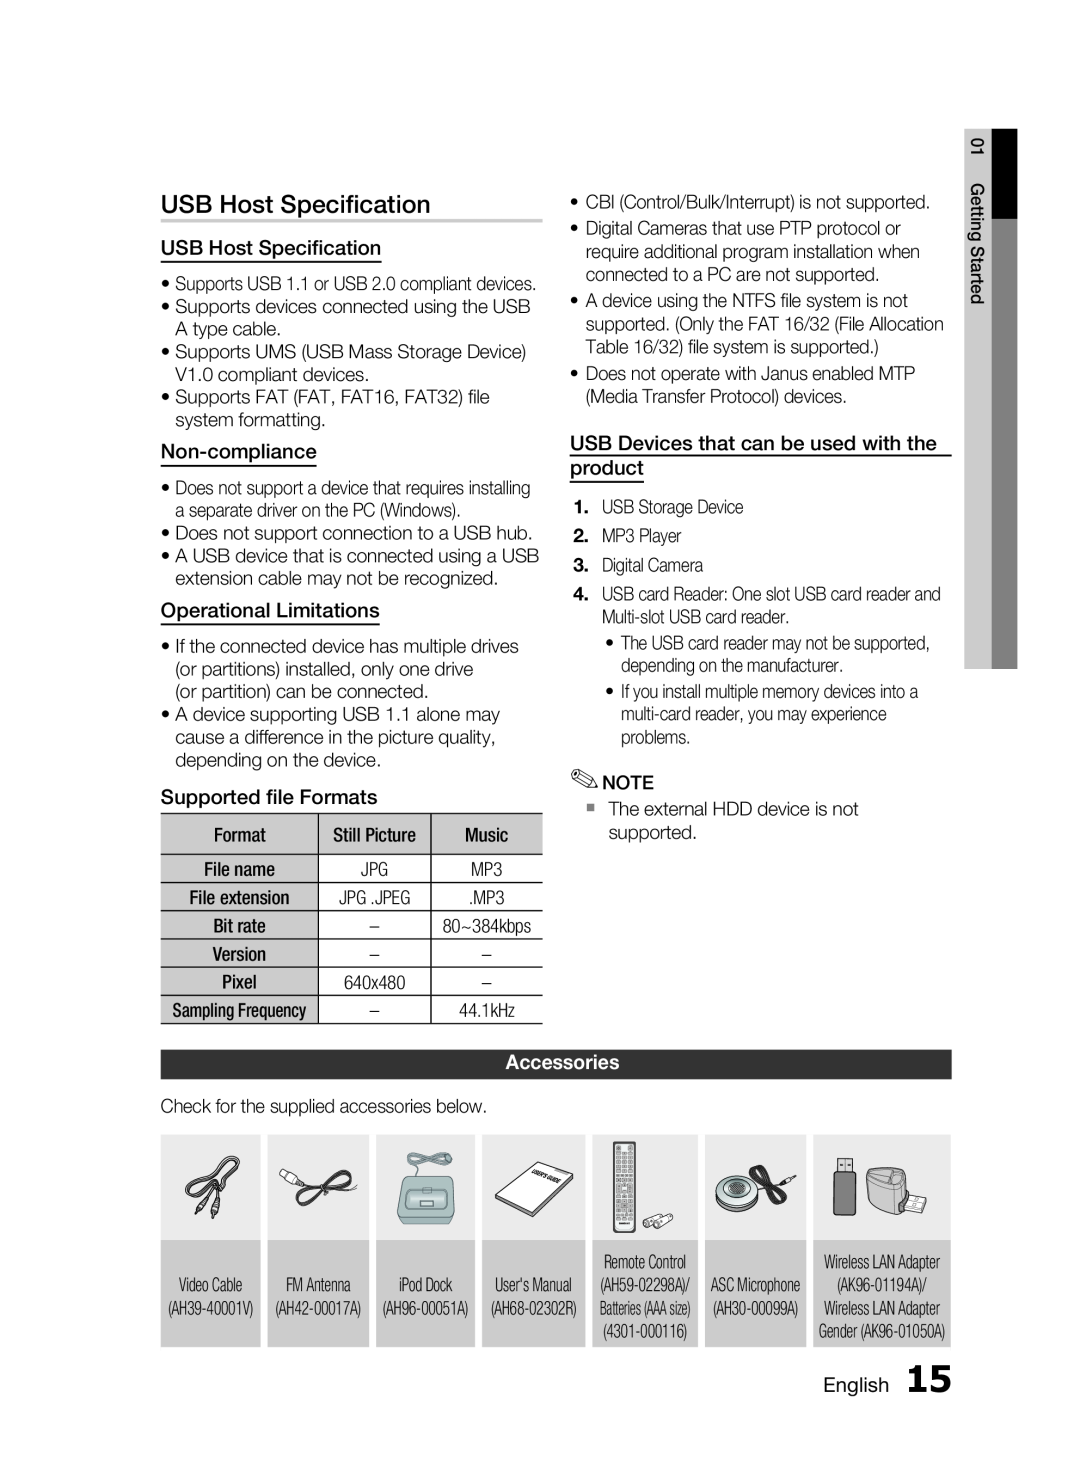 Samsung C6600 USB Host Speciﬁcation, Non-compliance, Operational Limitations, Supported ﬁle Formats, Accessories, English 